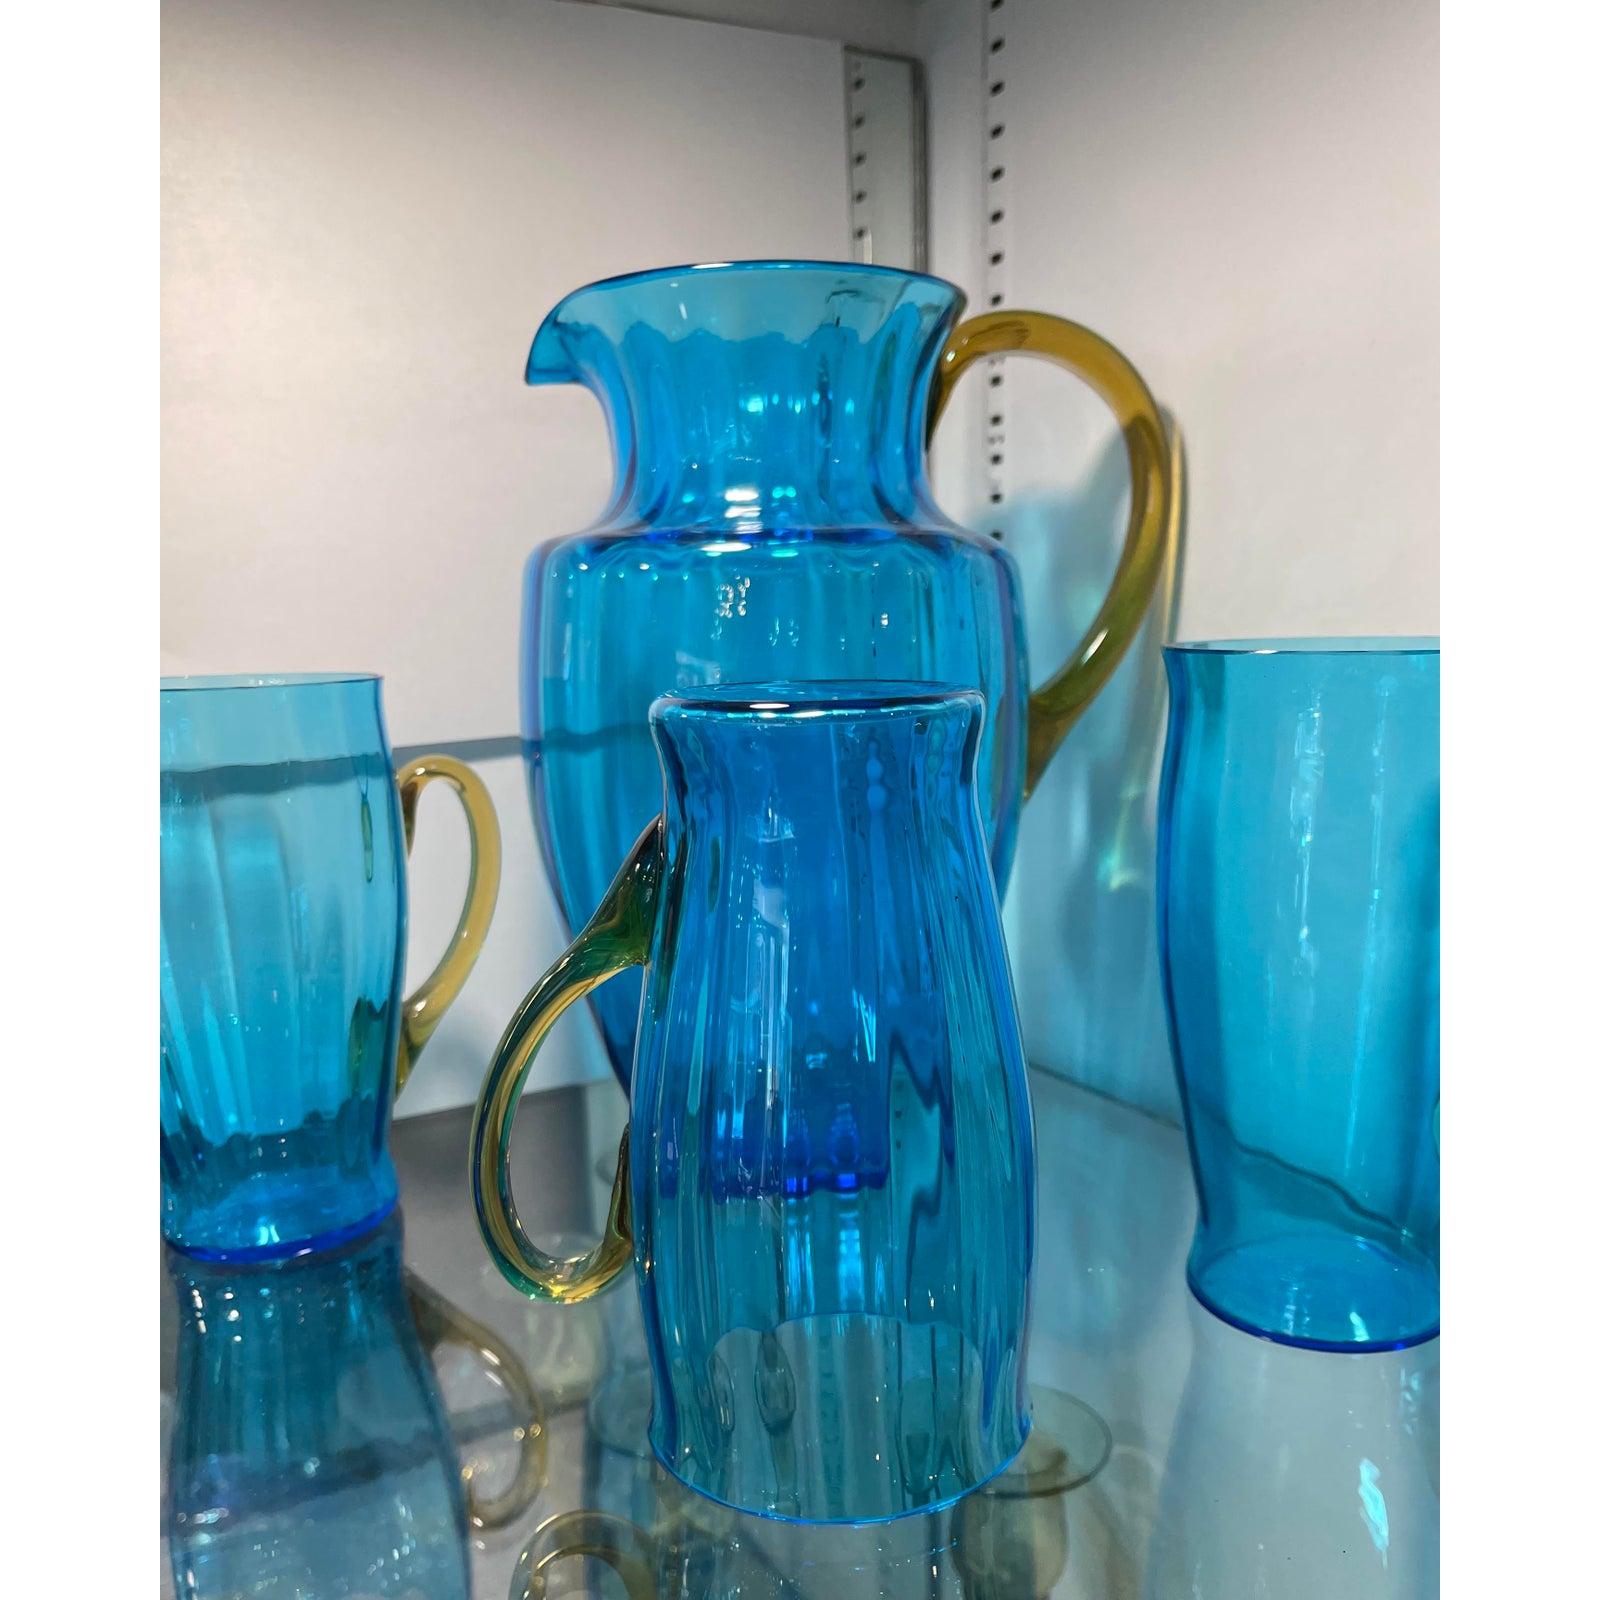 Rare Carder Steuben Blue Glass Iced Tea Pitcher Handled Tumbler Mug Set. Includes pitcher and 4 handle tumblers

Additional information:
Materials: Glass
Color: Blue
Brand: Steuben Glass
Period: 1930s
Styles: Mid-Century Modern 
Item Type: